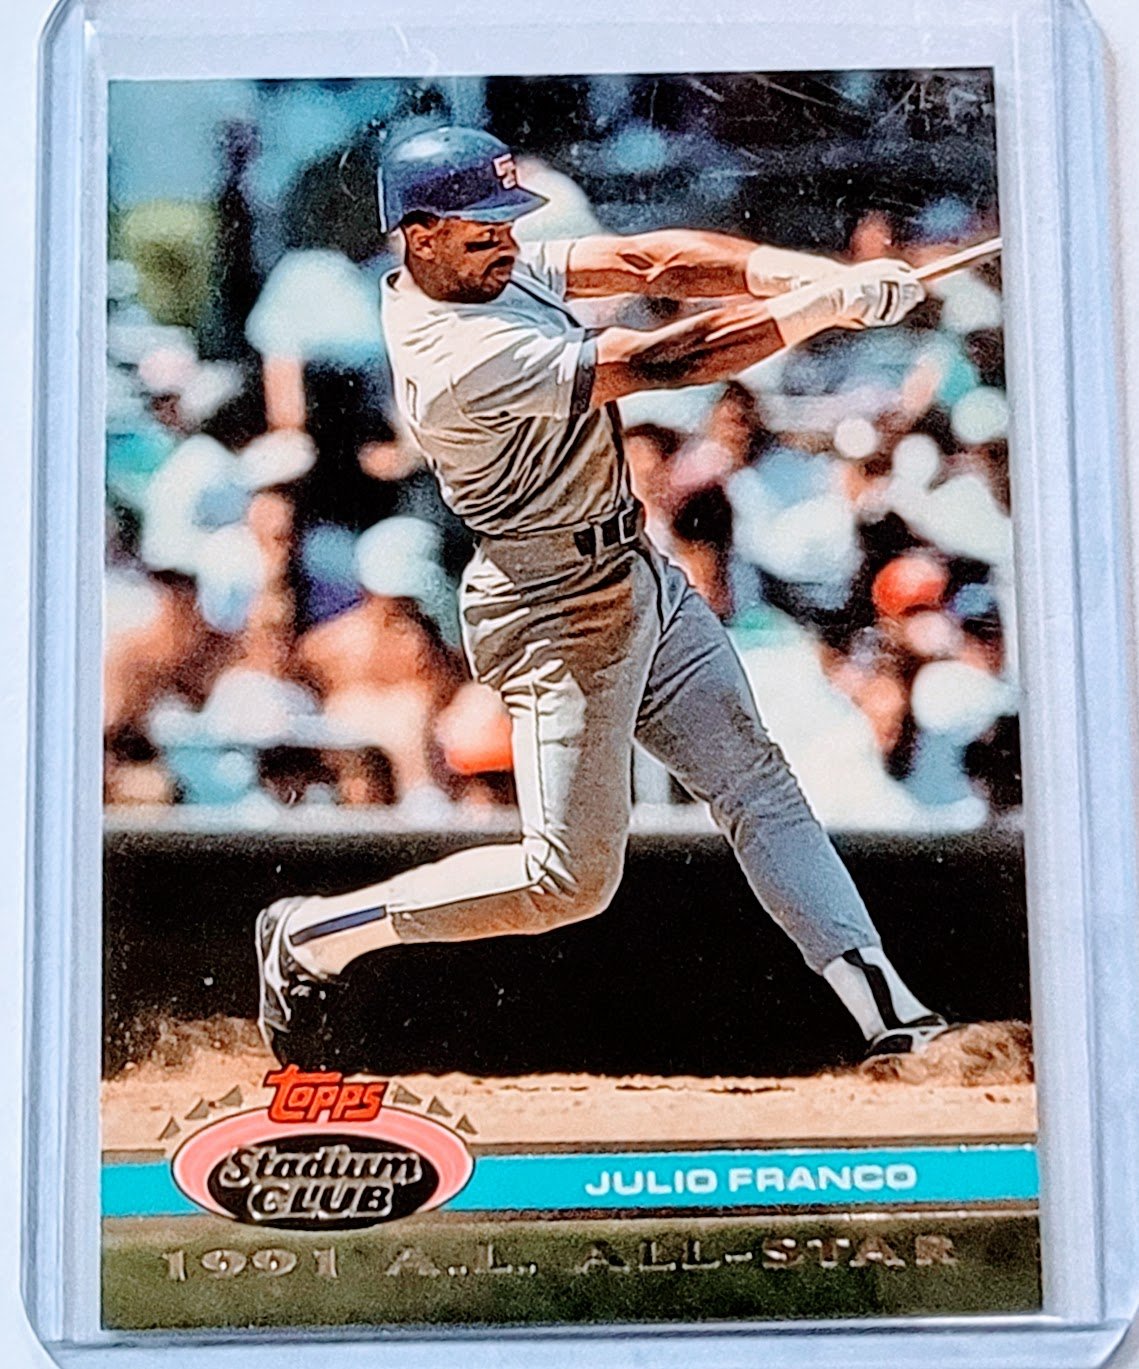 1992 Topps Stadium Club Dome Julio Franco 1991 All Star MLB Baseball Trading Card TPTV simple Xclusive Collectibles   